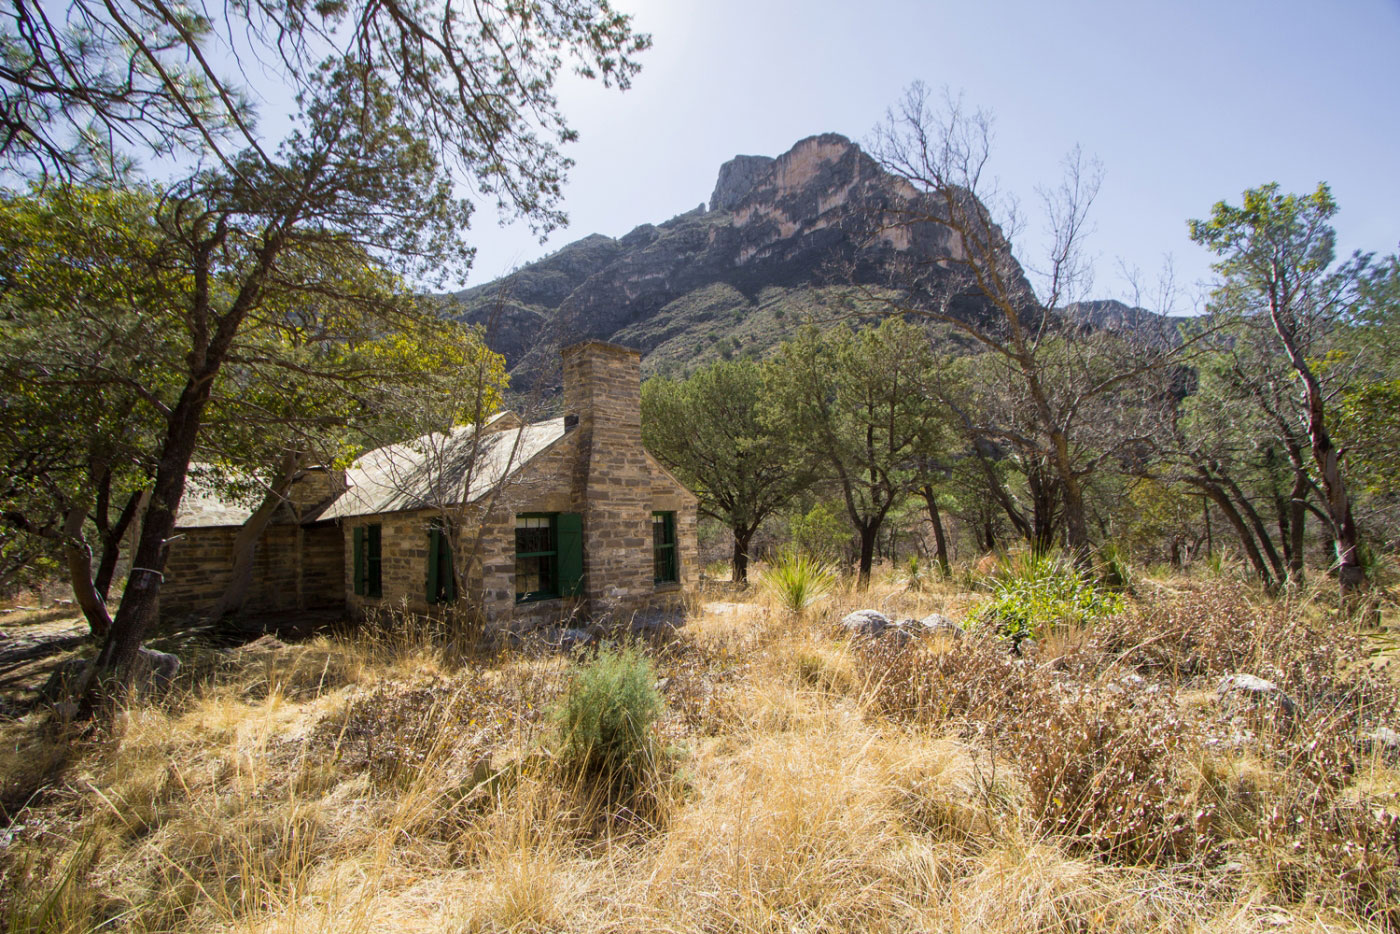 Hike McKittrick Canyon to McKittrick Ridge in Guadalupe Mountains National Park, Texas - Stav is Lost